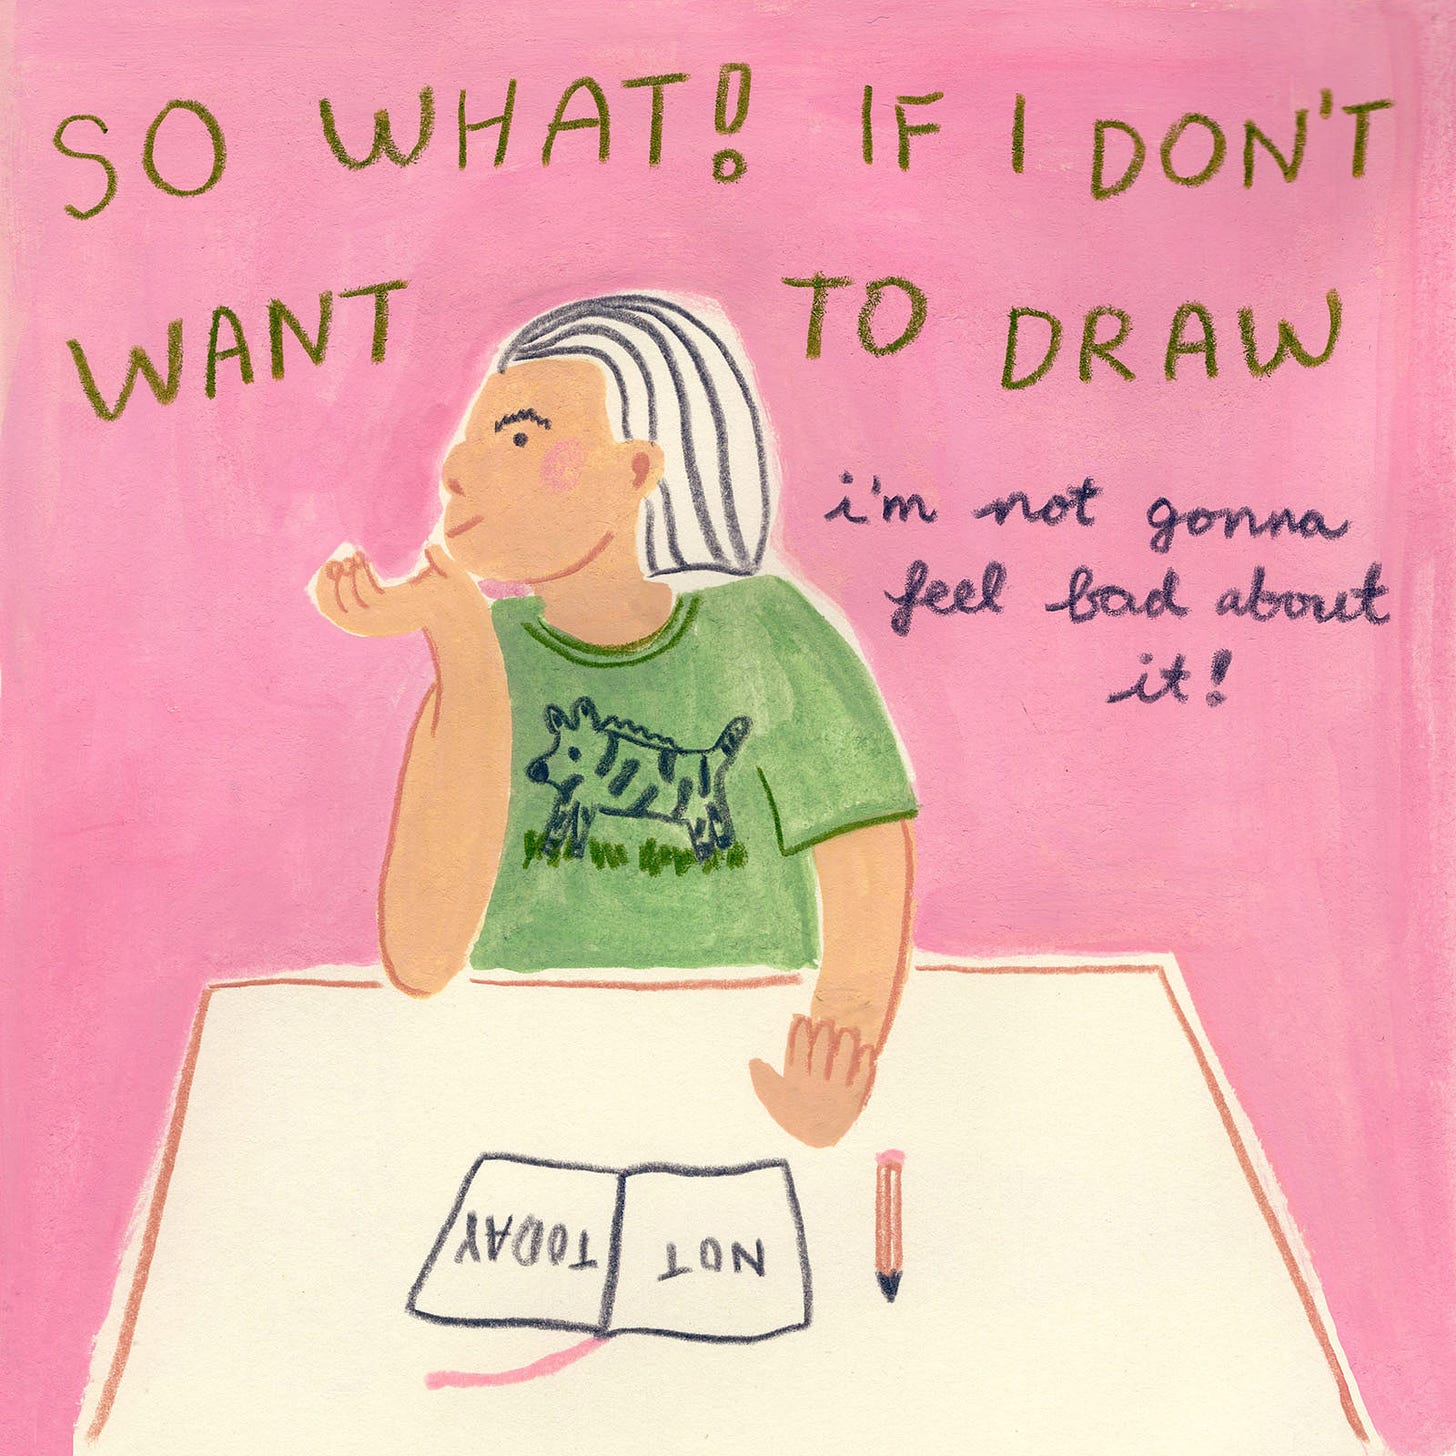 So what if I don't want to draw? I'm not gonna feel bad about it!